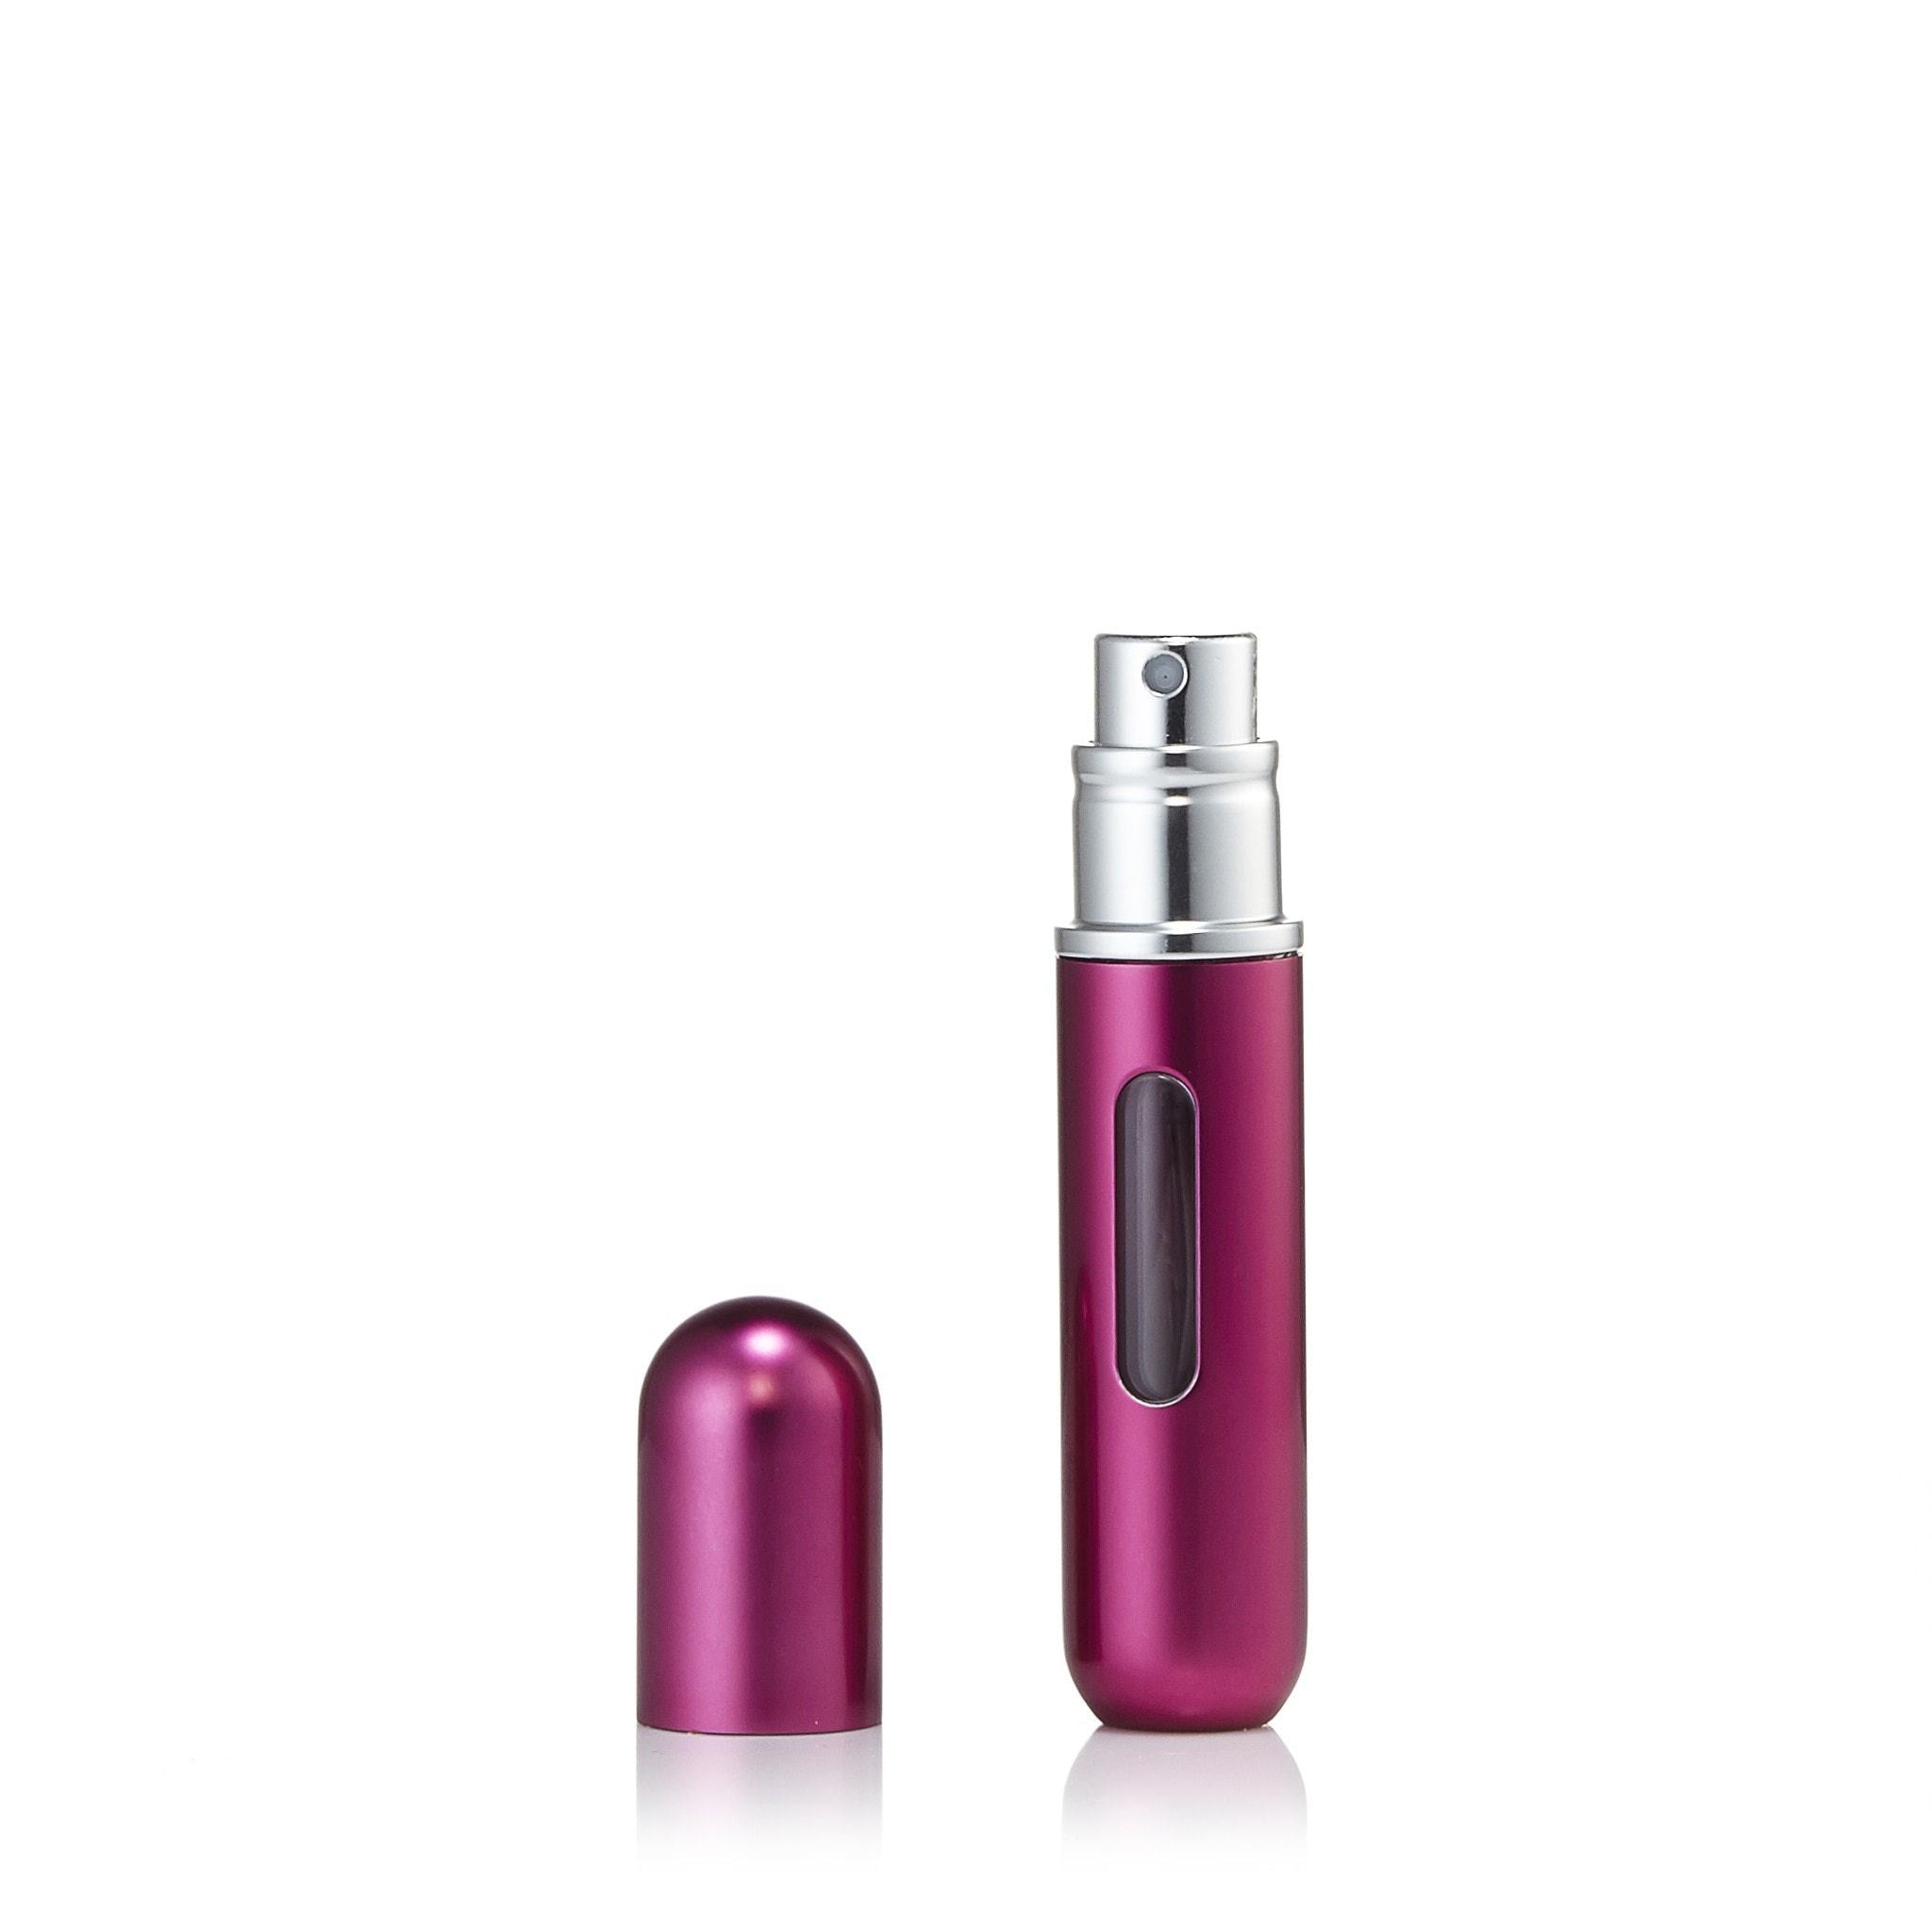 and – by Atomizer Fragrance Fill Flo Perfumania Pump